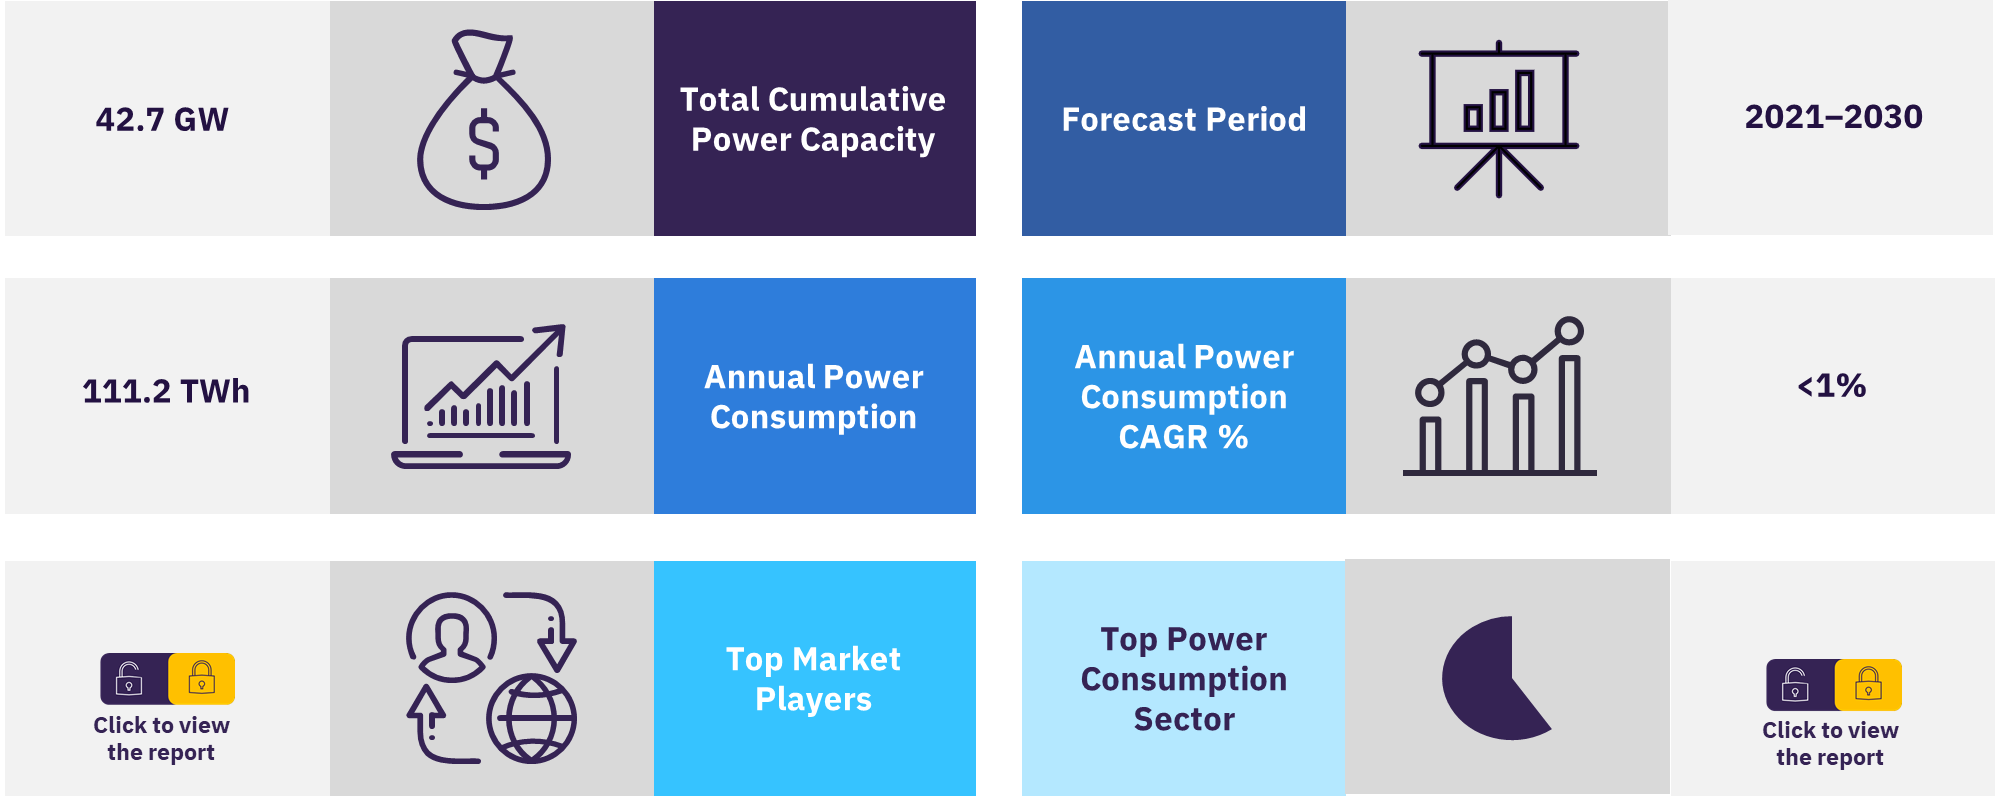 The Netherlands power market overview